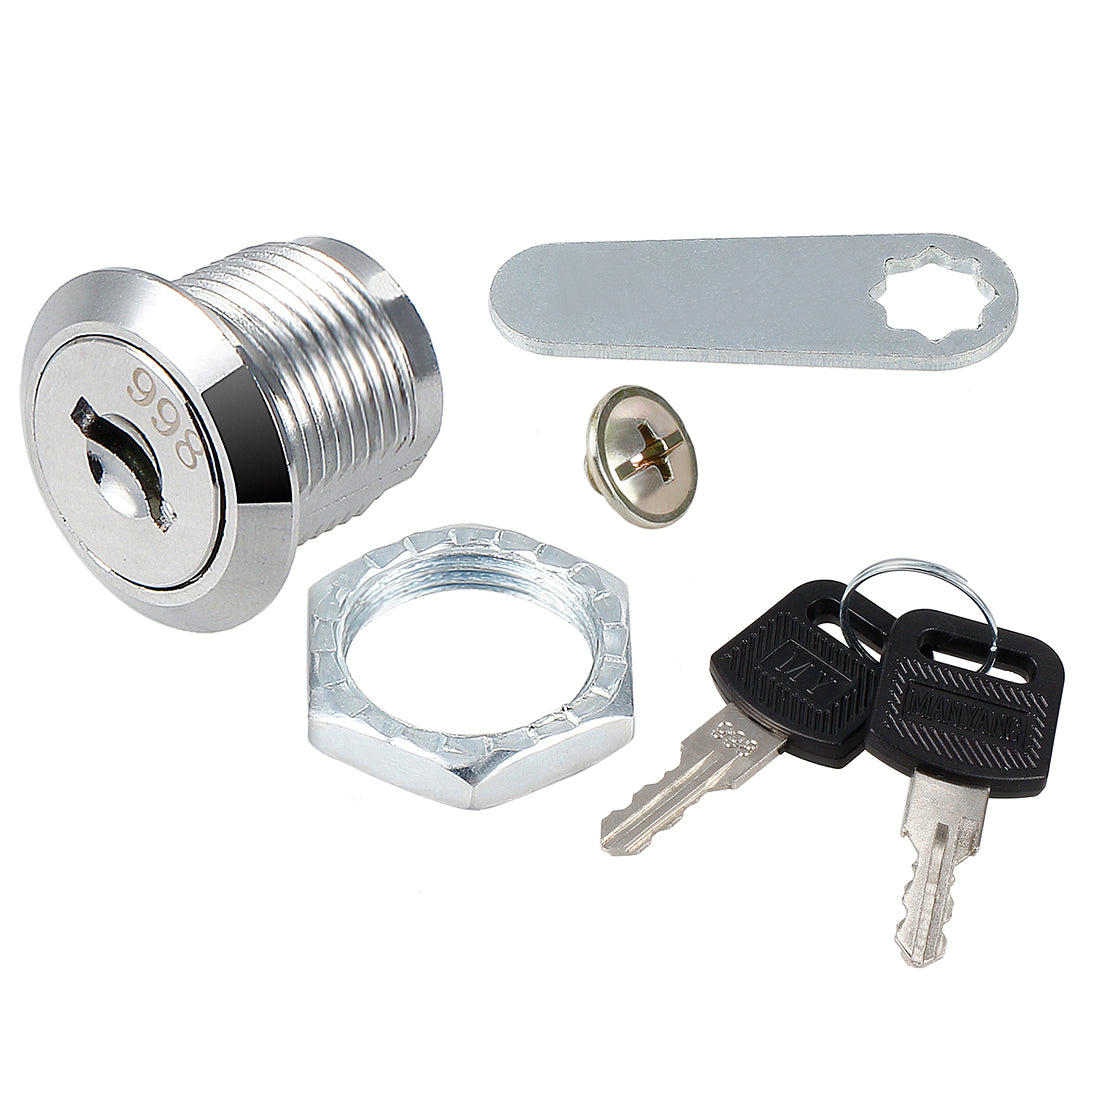 uxcell Uxcell 5/8" Cylinder Length Zinc Alloy Chrome Plated Cam Lock w Key, Keyed Different